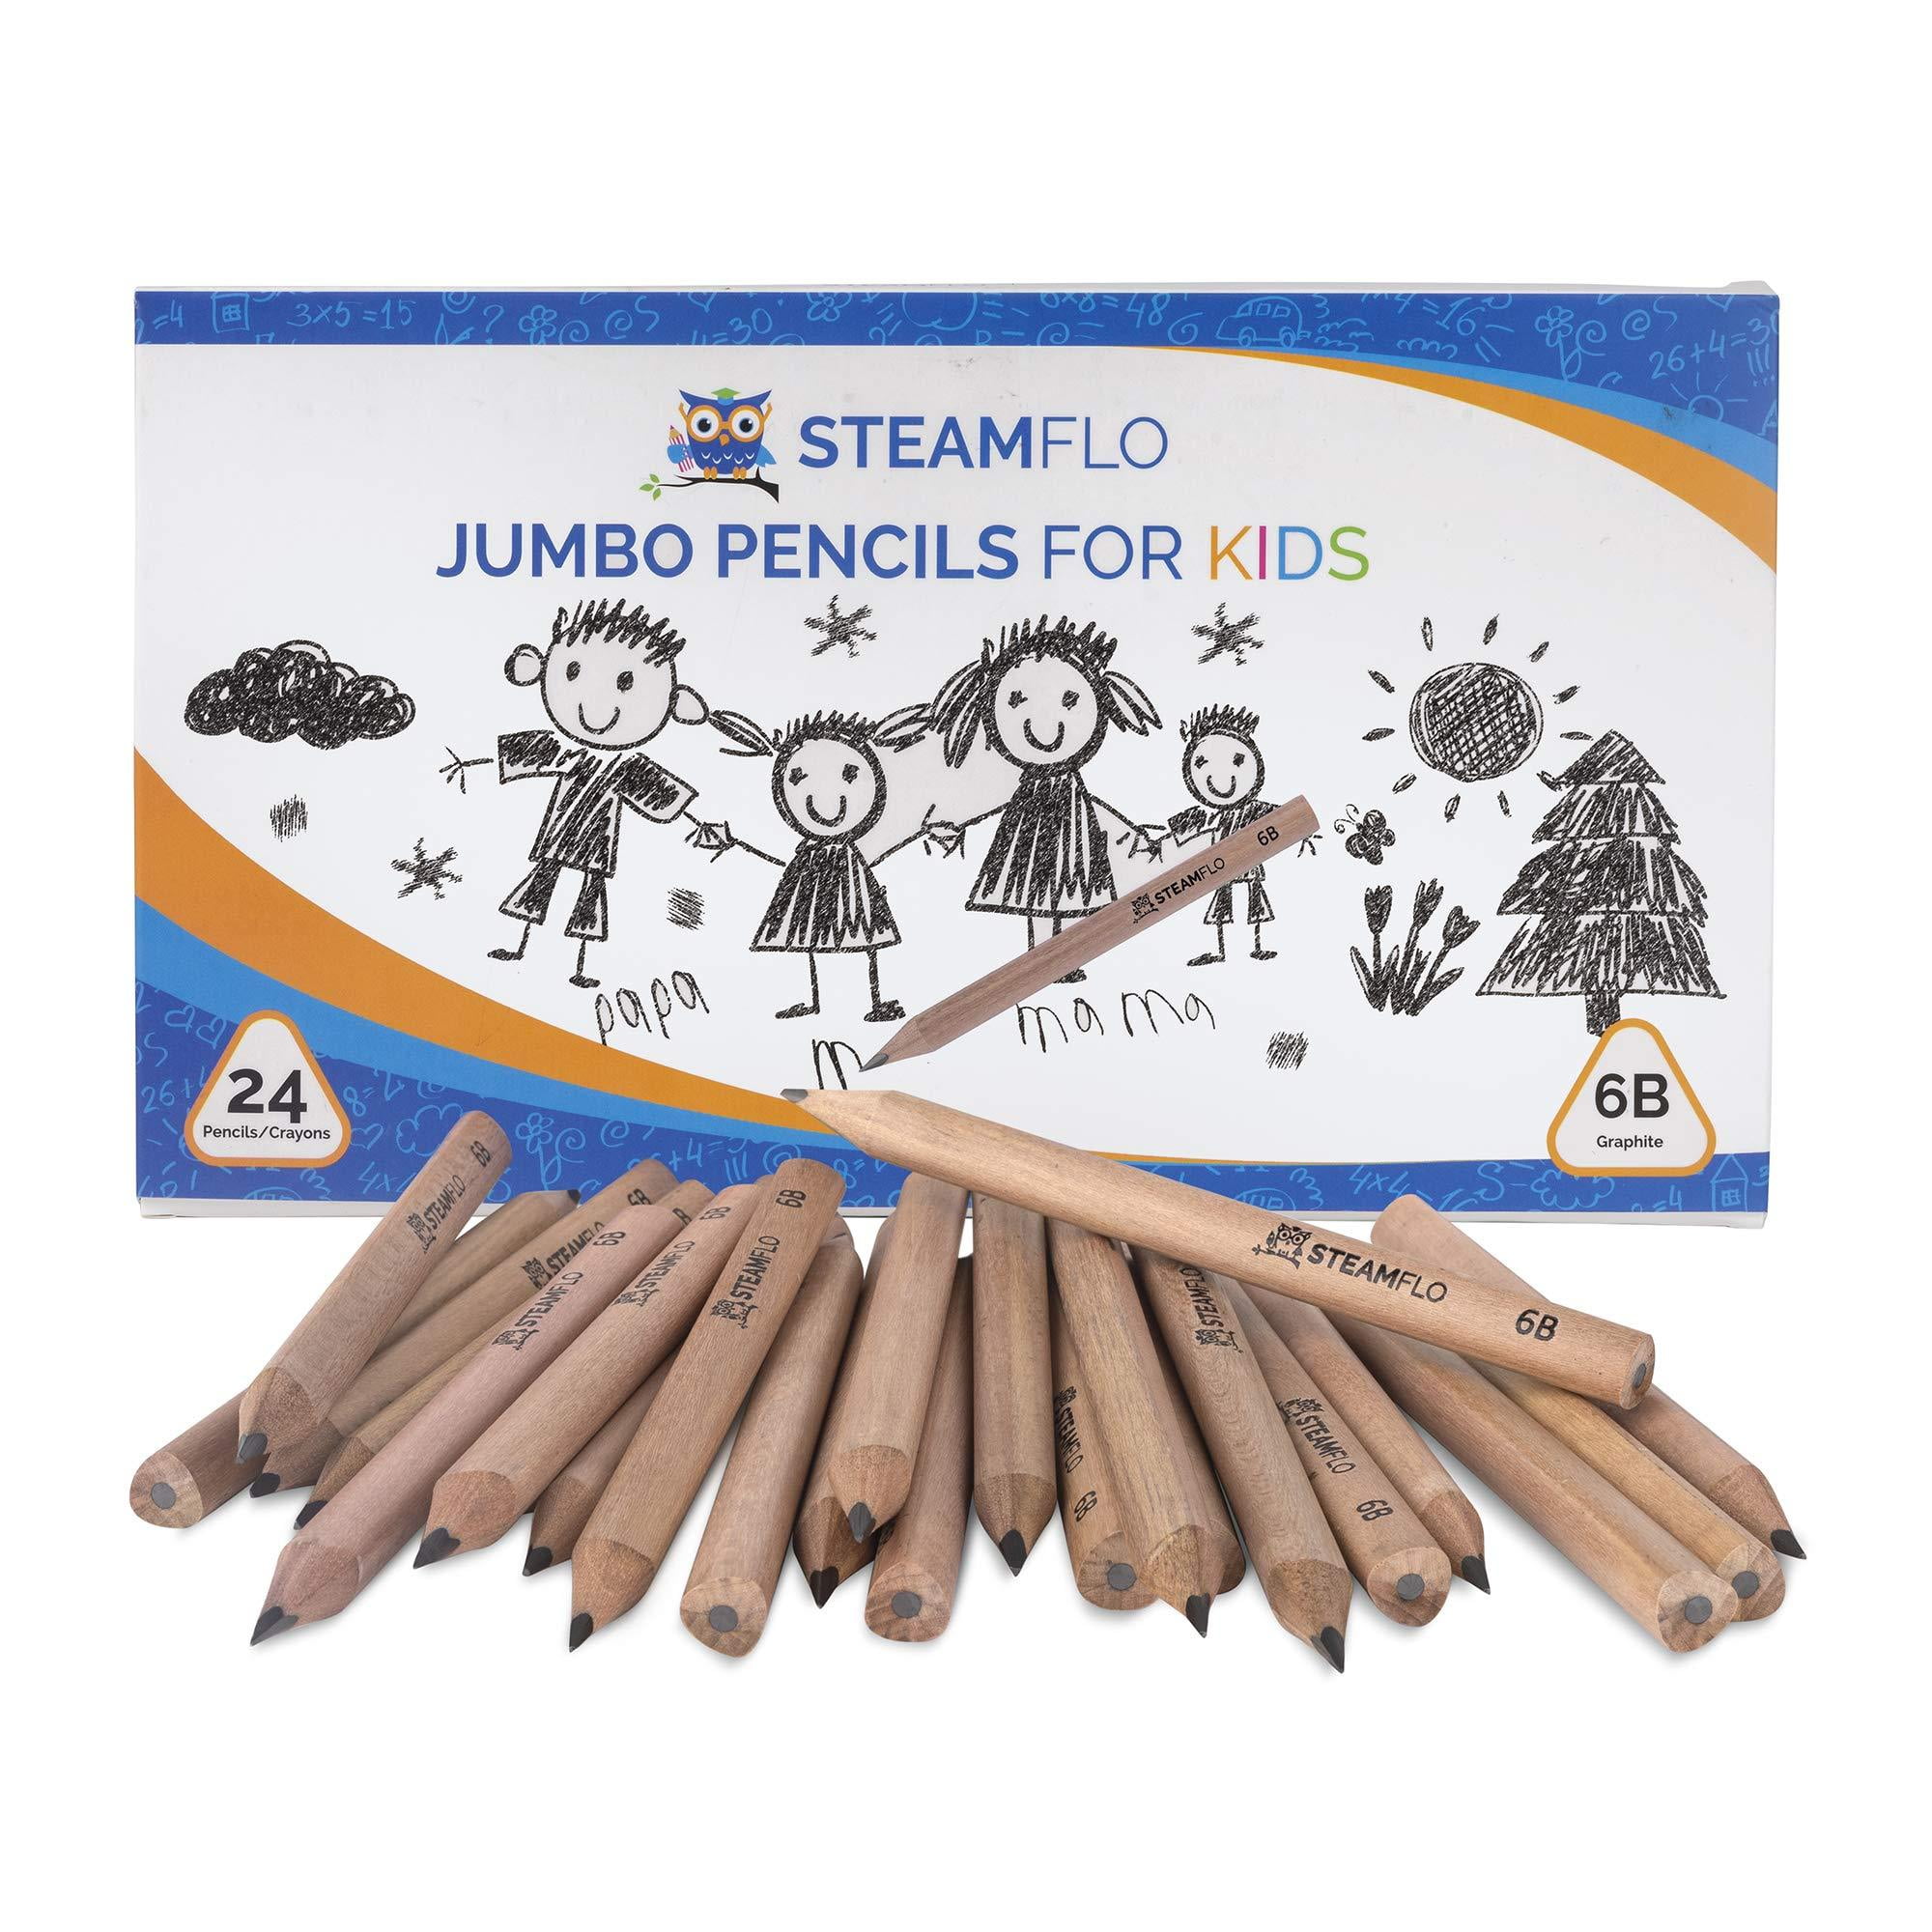  STEAMFLO Learning Pencils for Toddlers 2-4 Years – Our Kids  Pencils for Beginners Toddlers and Preschoolers with Jumbo Triangle Shape  are Specially Designed Triangle Pencils (12 Pack) : Office Products